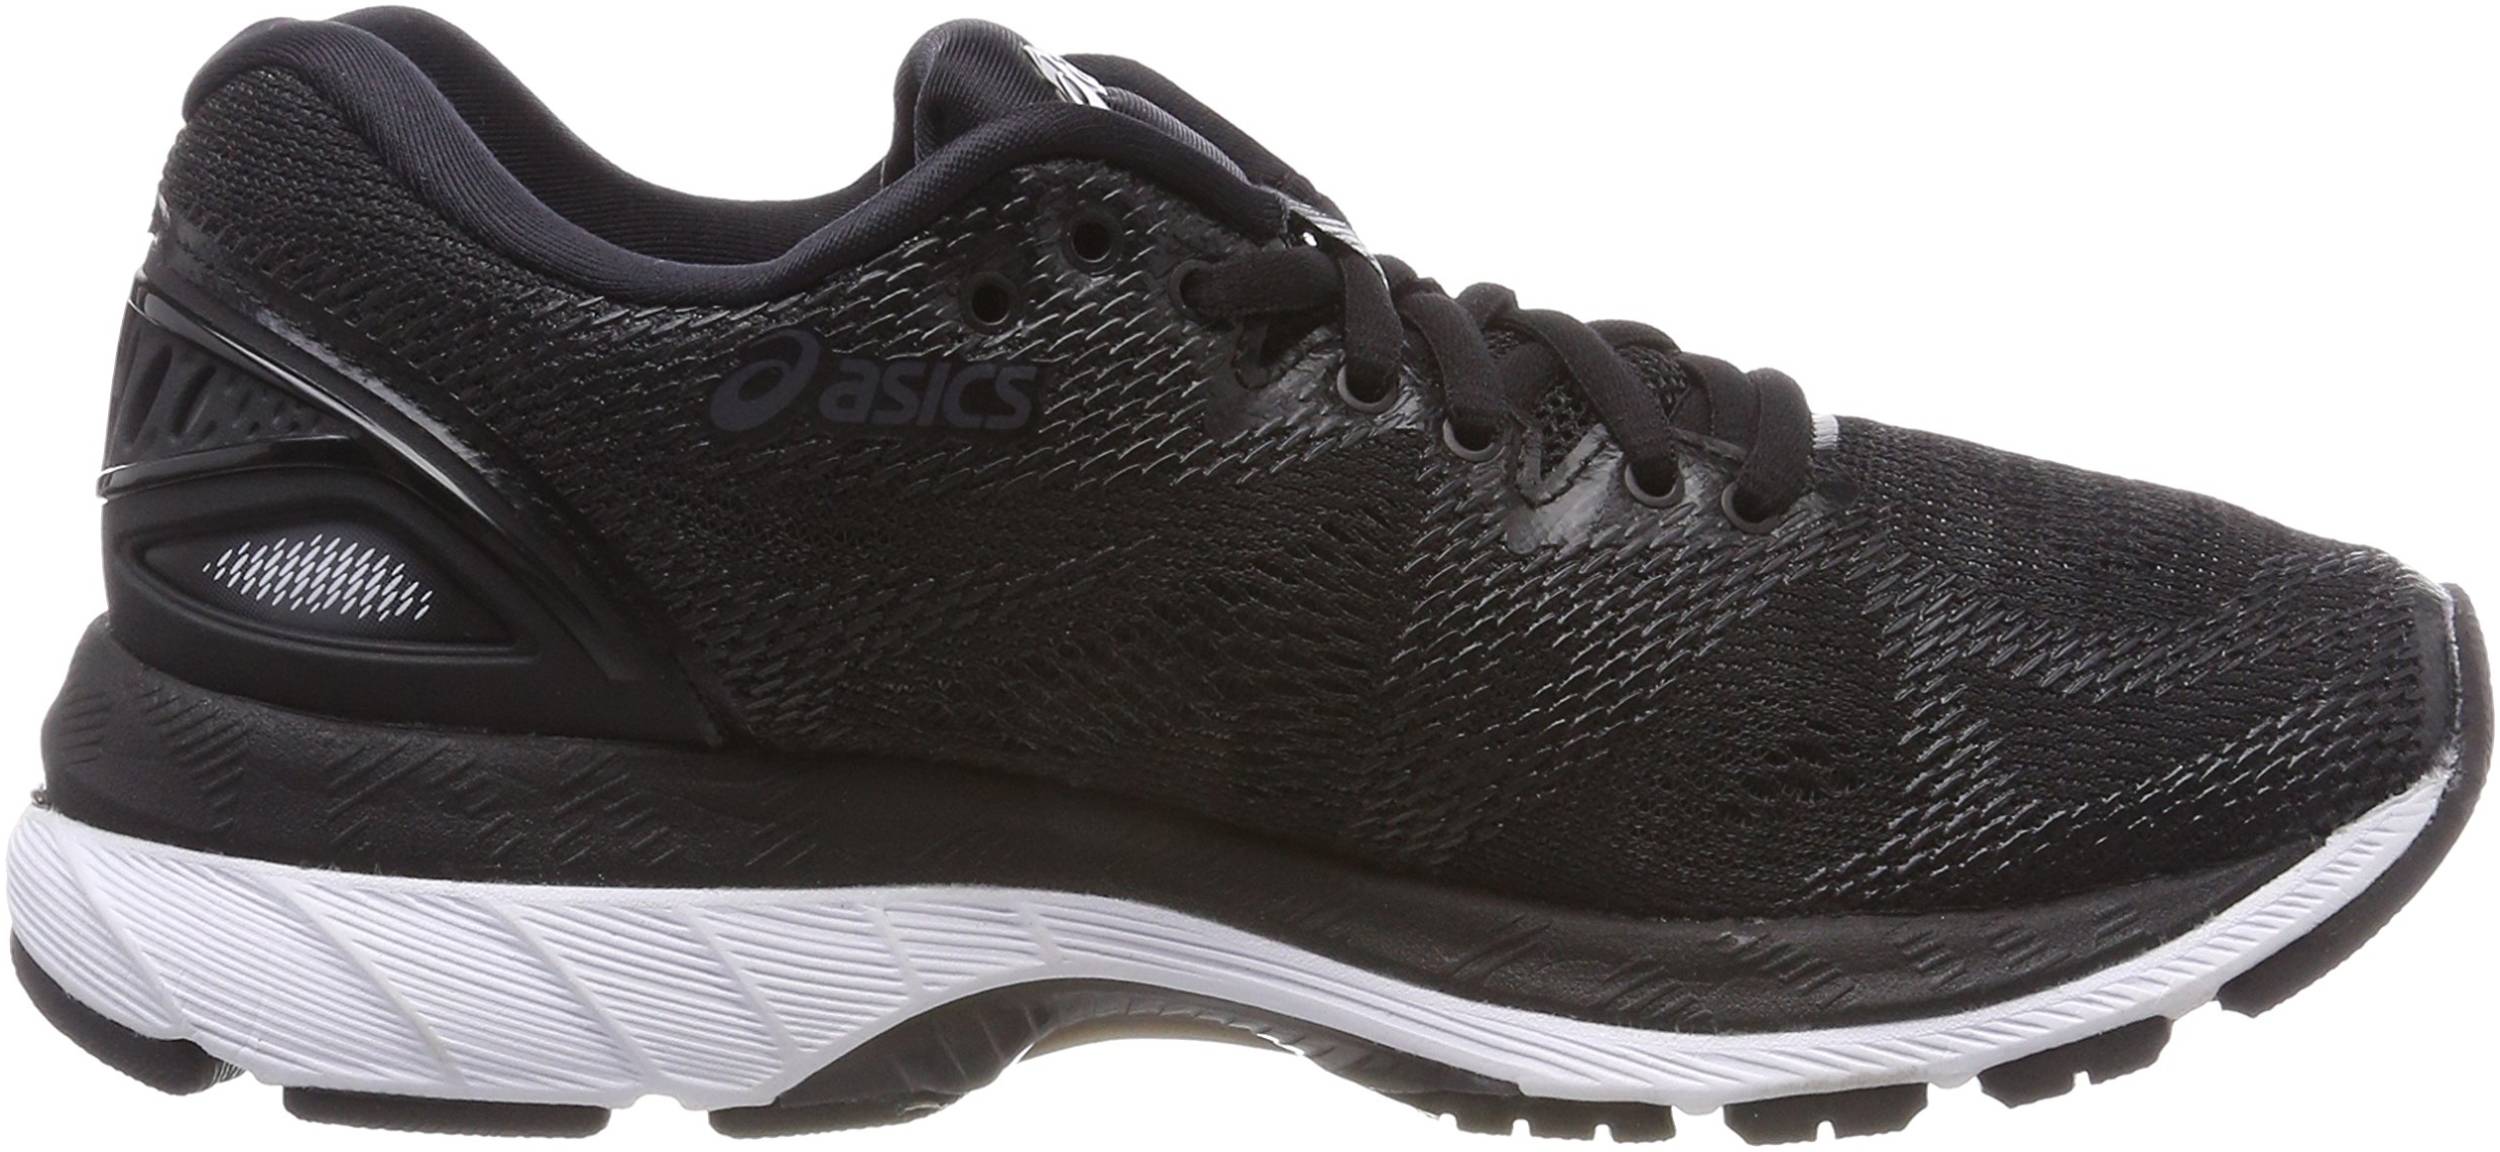 Save 38% on Wide Asics Running Shoes 